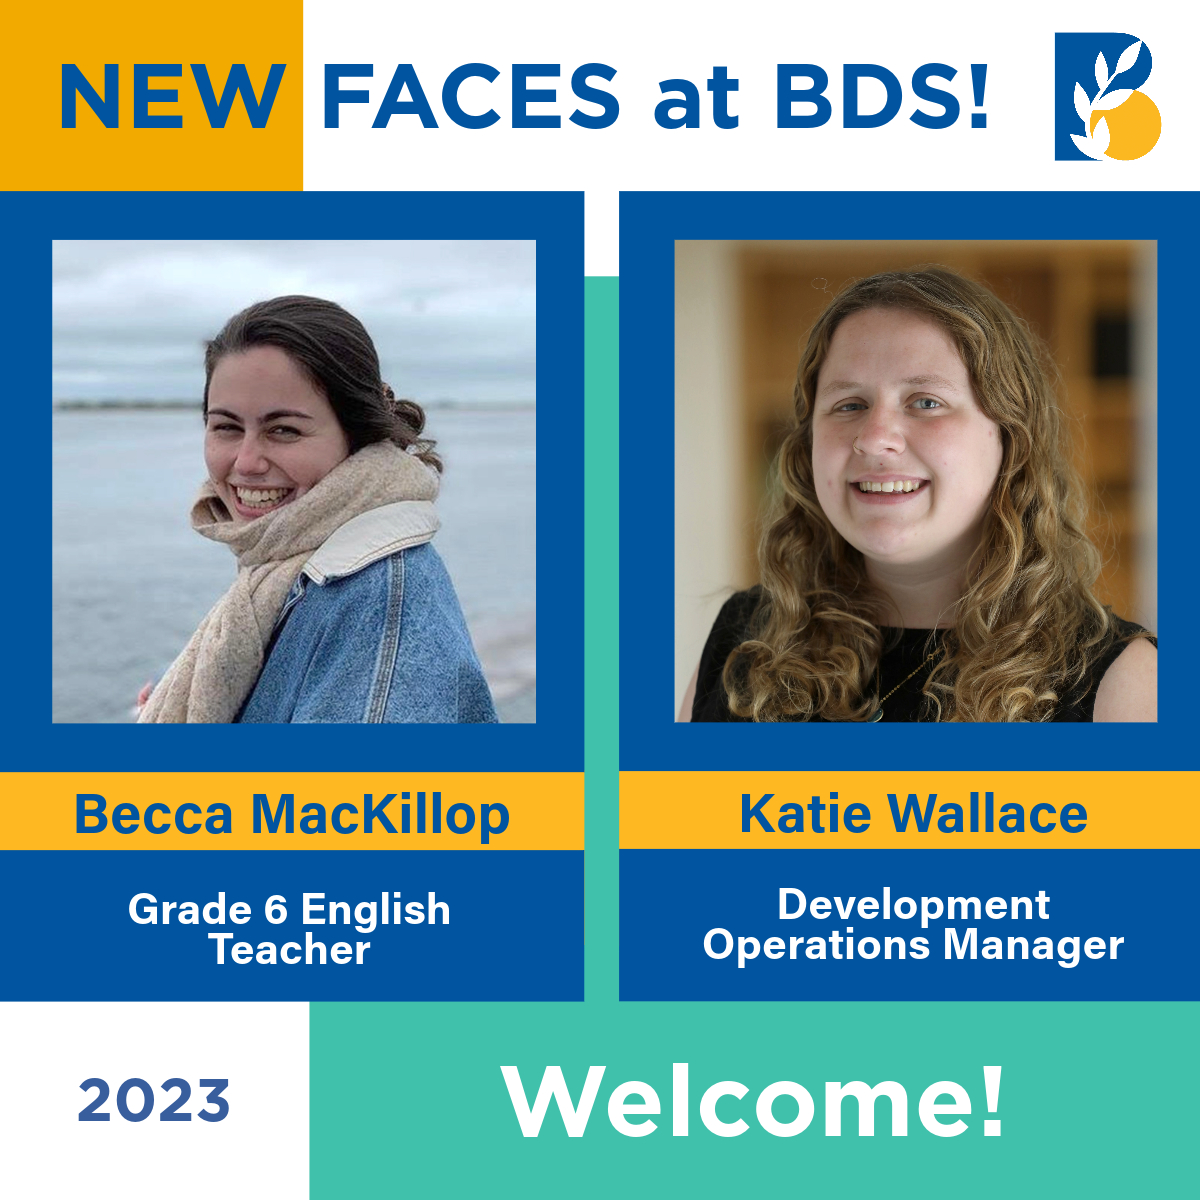 When you're back for the new school year ... say hi to new BDS team members, Becca and Katie! #education #community #faculty #independentschool